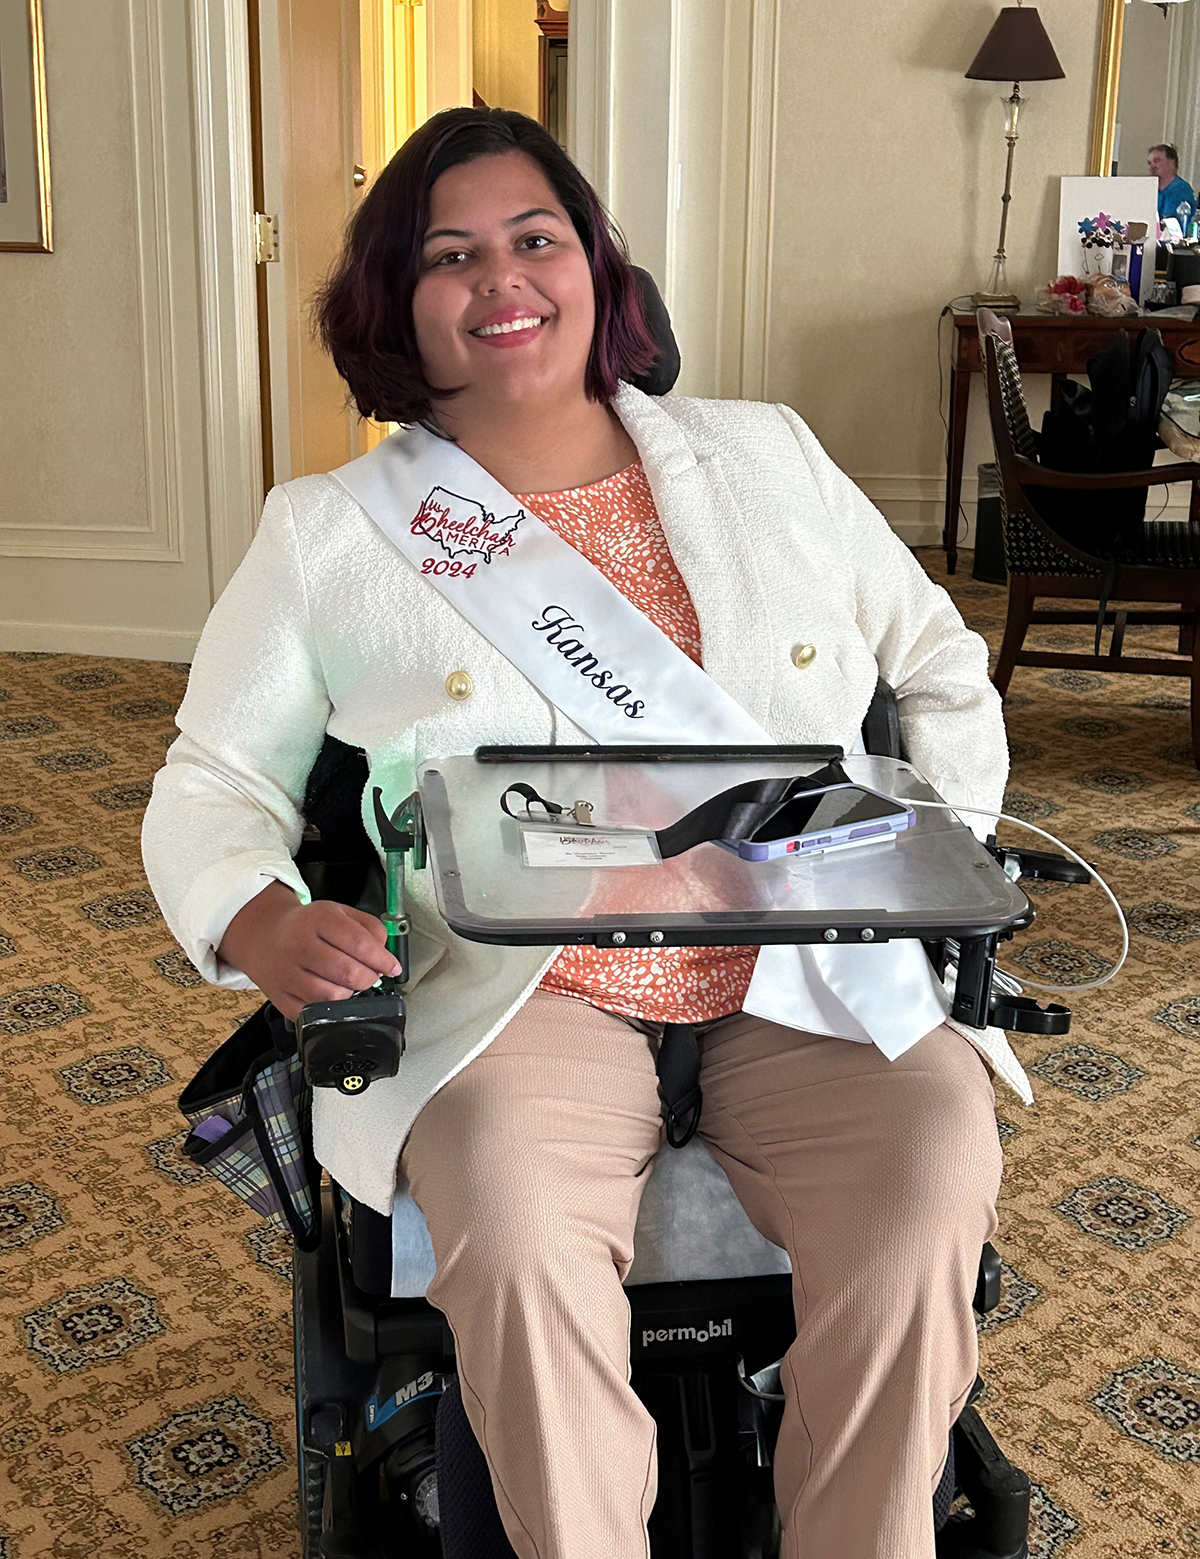 Daija Coleman won the Ms. Wheelchair Kansas competition last spring and finished as first runner-up in the national competition.